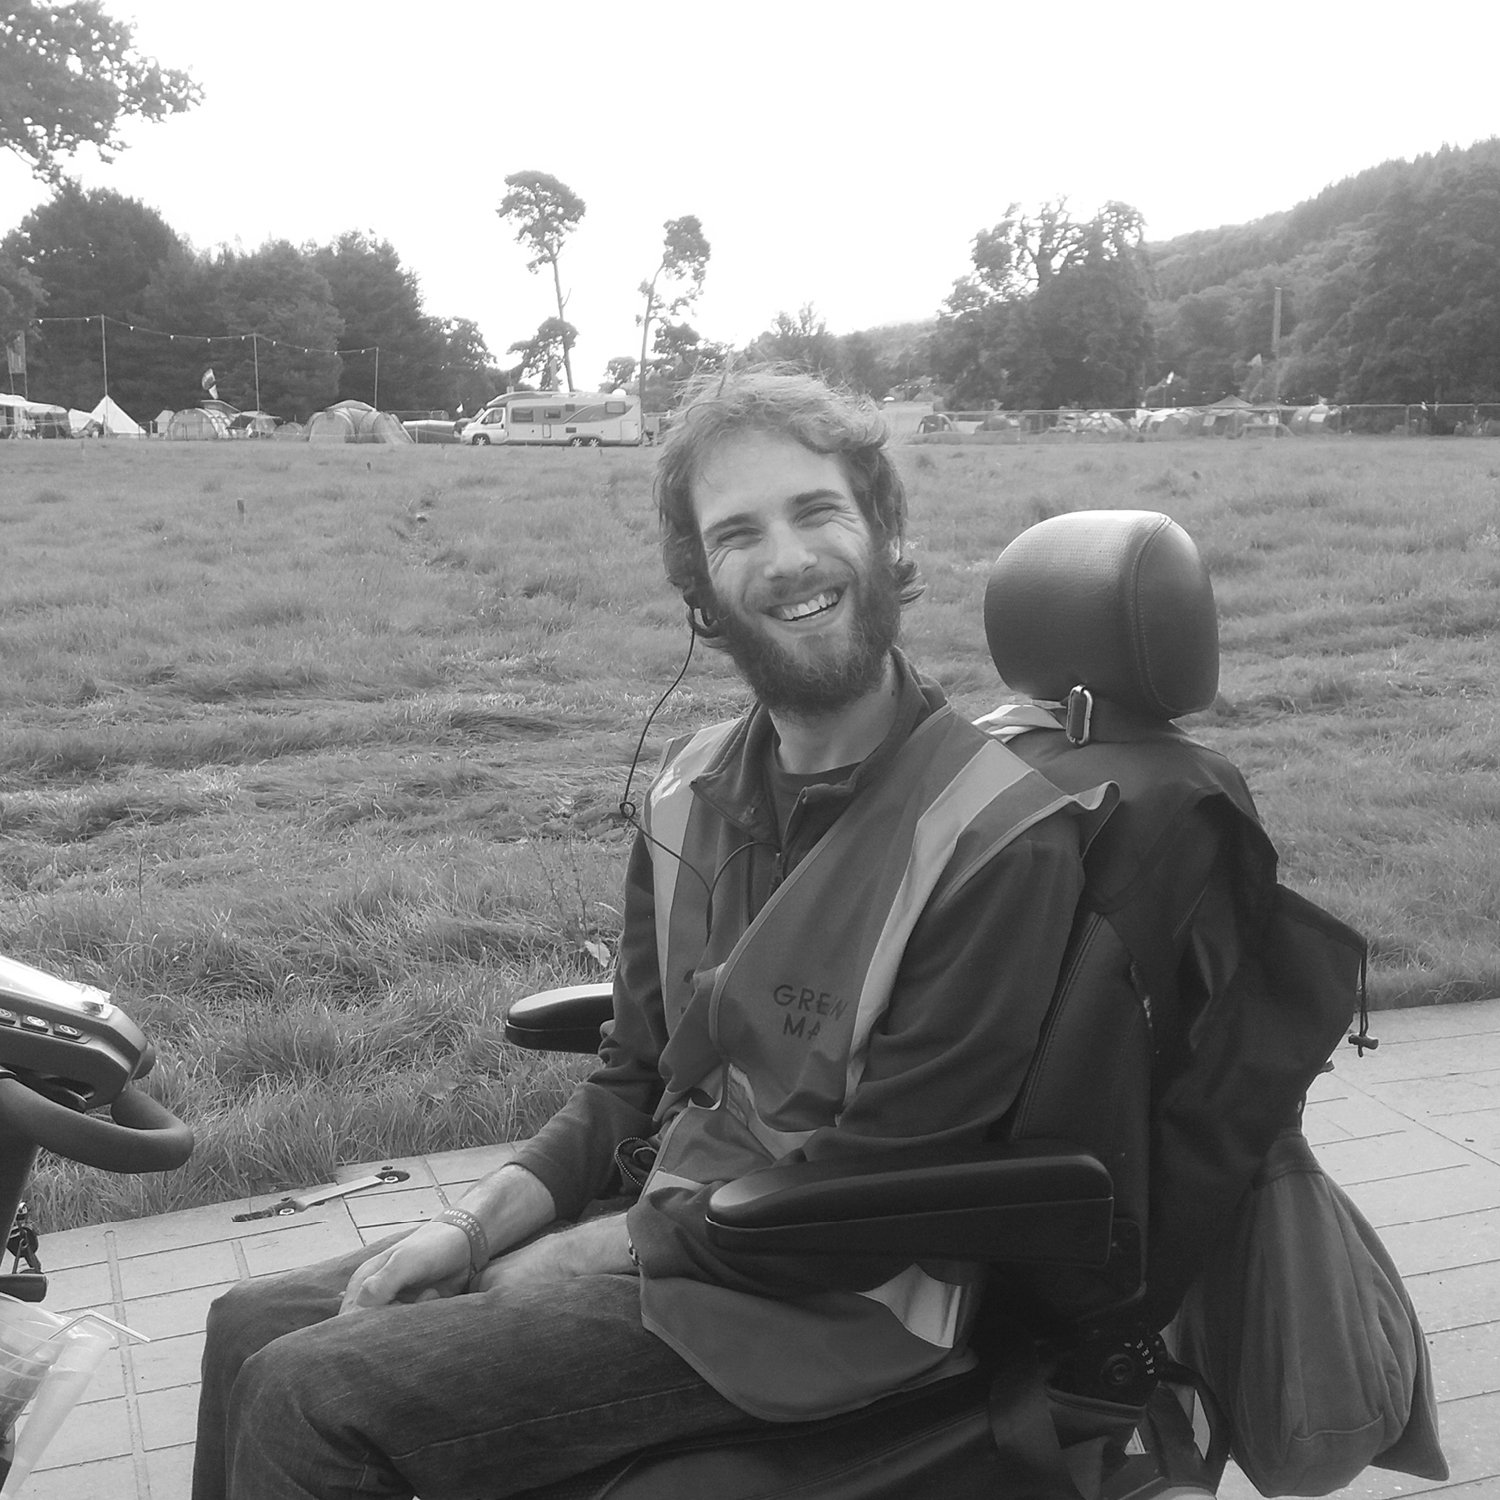 A white man with a beard sitting on a scooter in a field smiling.